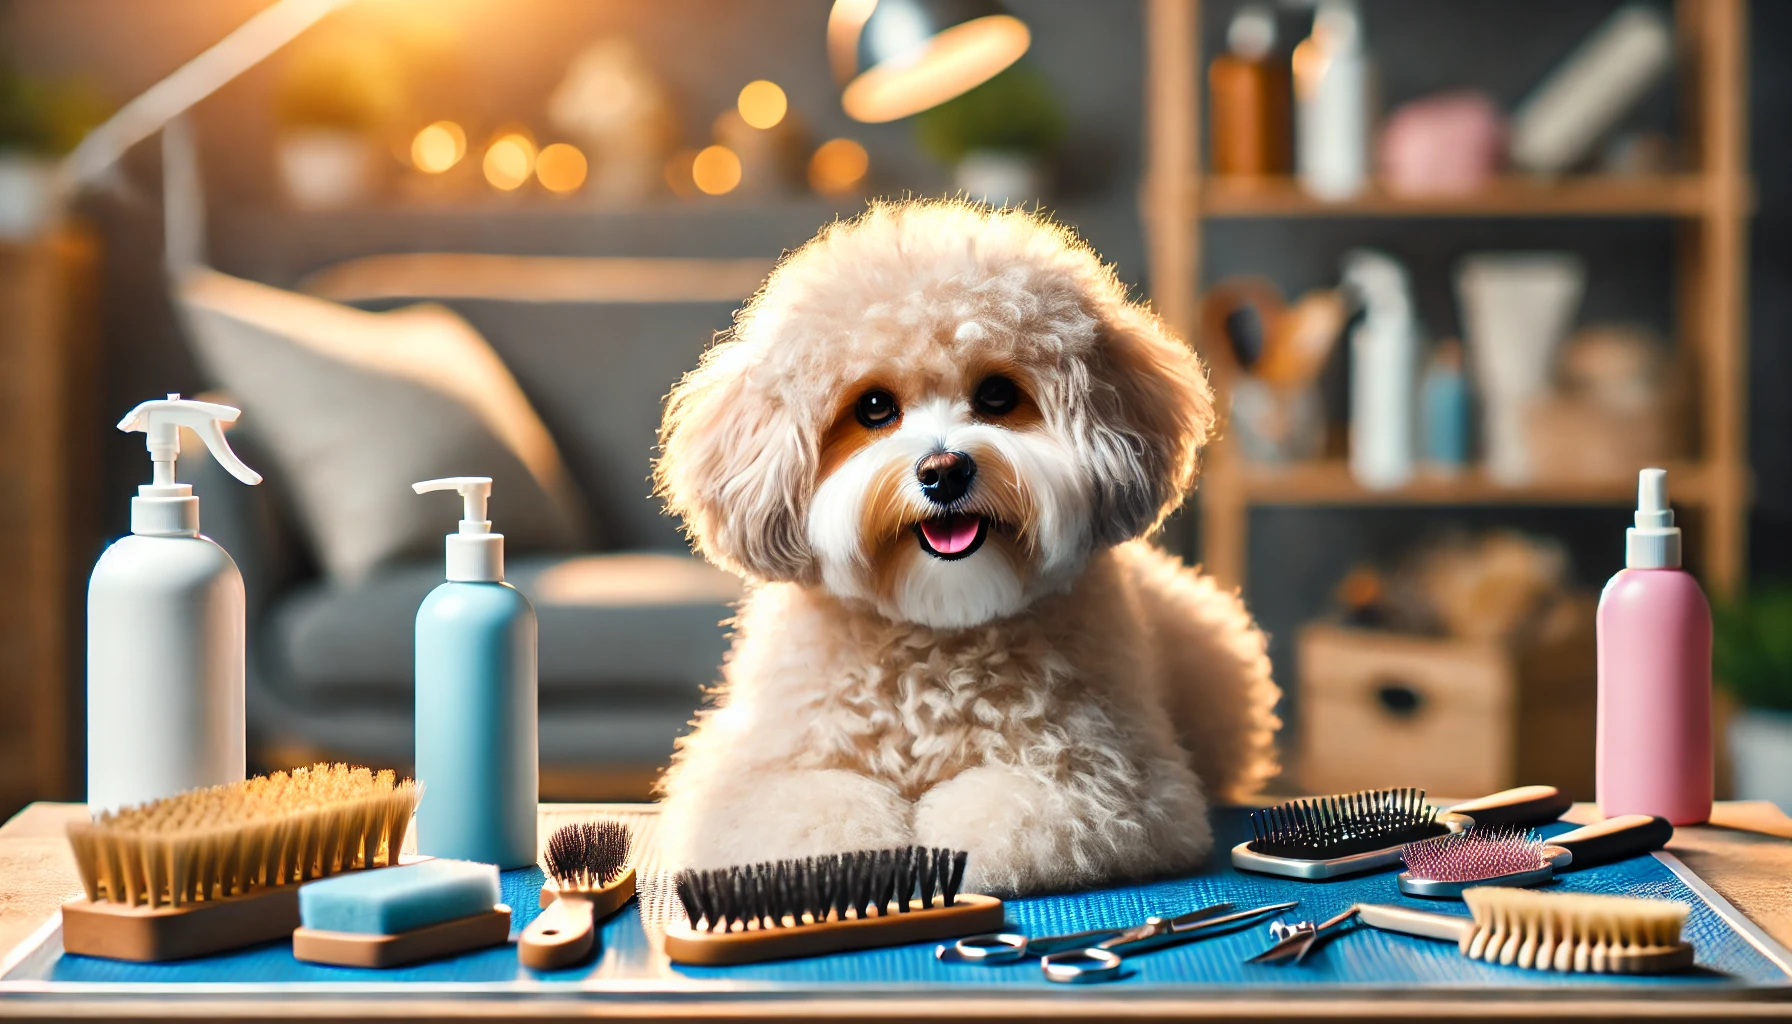  image of a small Maltipoo in a home grooming session. The dog is relaxed and happy, sitting on a grooming table 